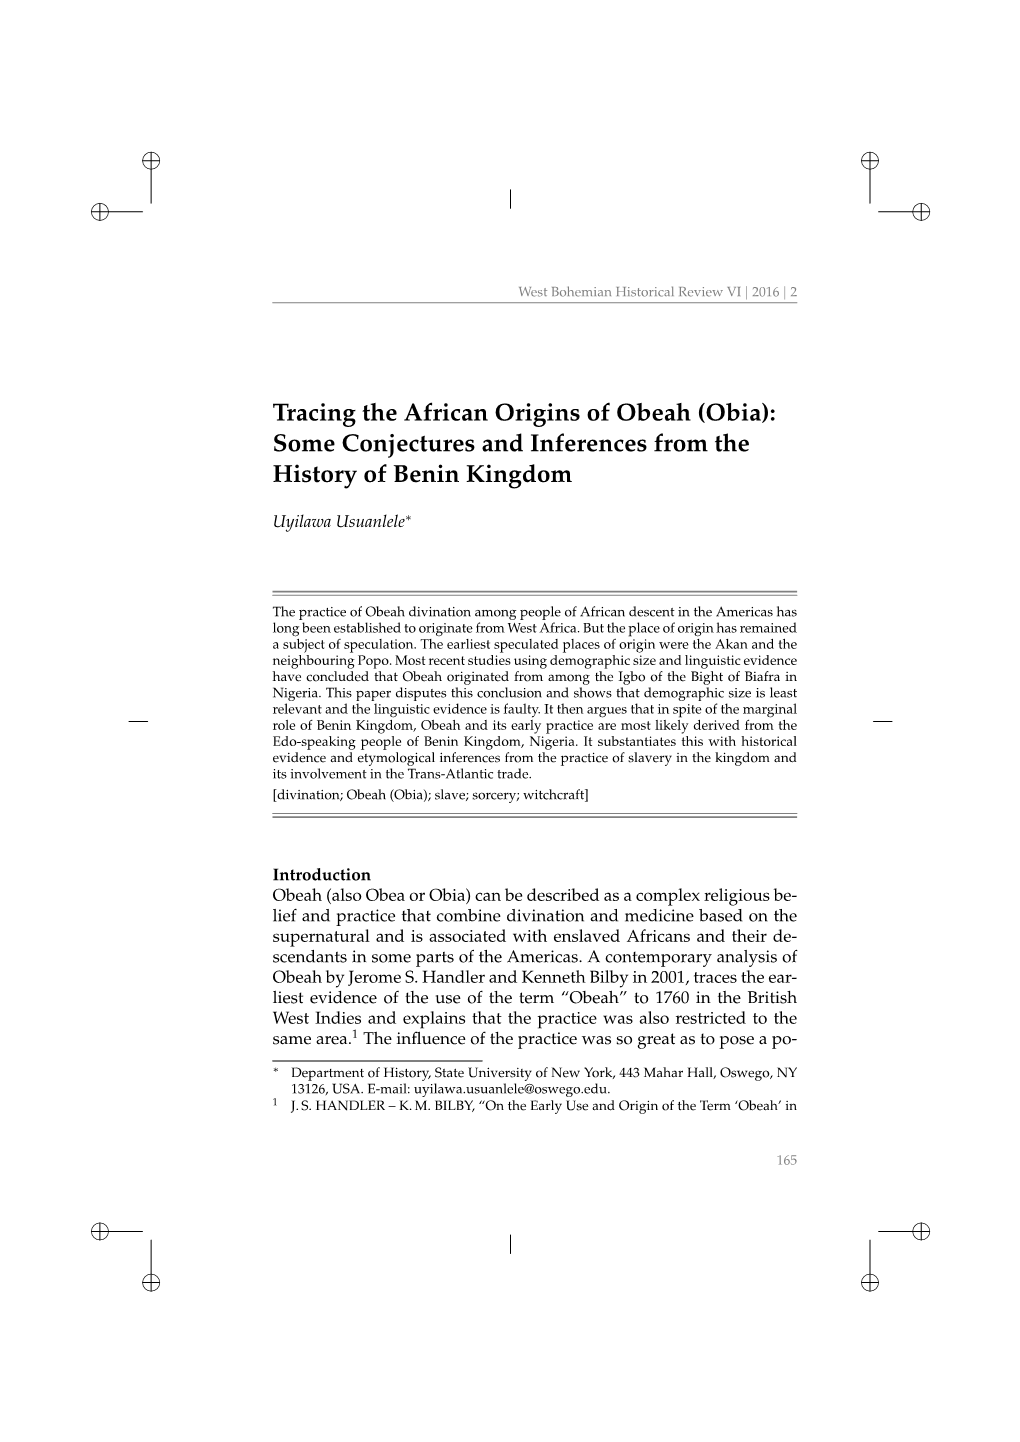 Tracing the African Origins of Obeah (Obia): Some Conjectures and Inferences from the History of Benin Kingdom